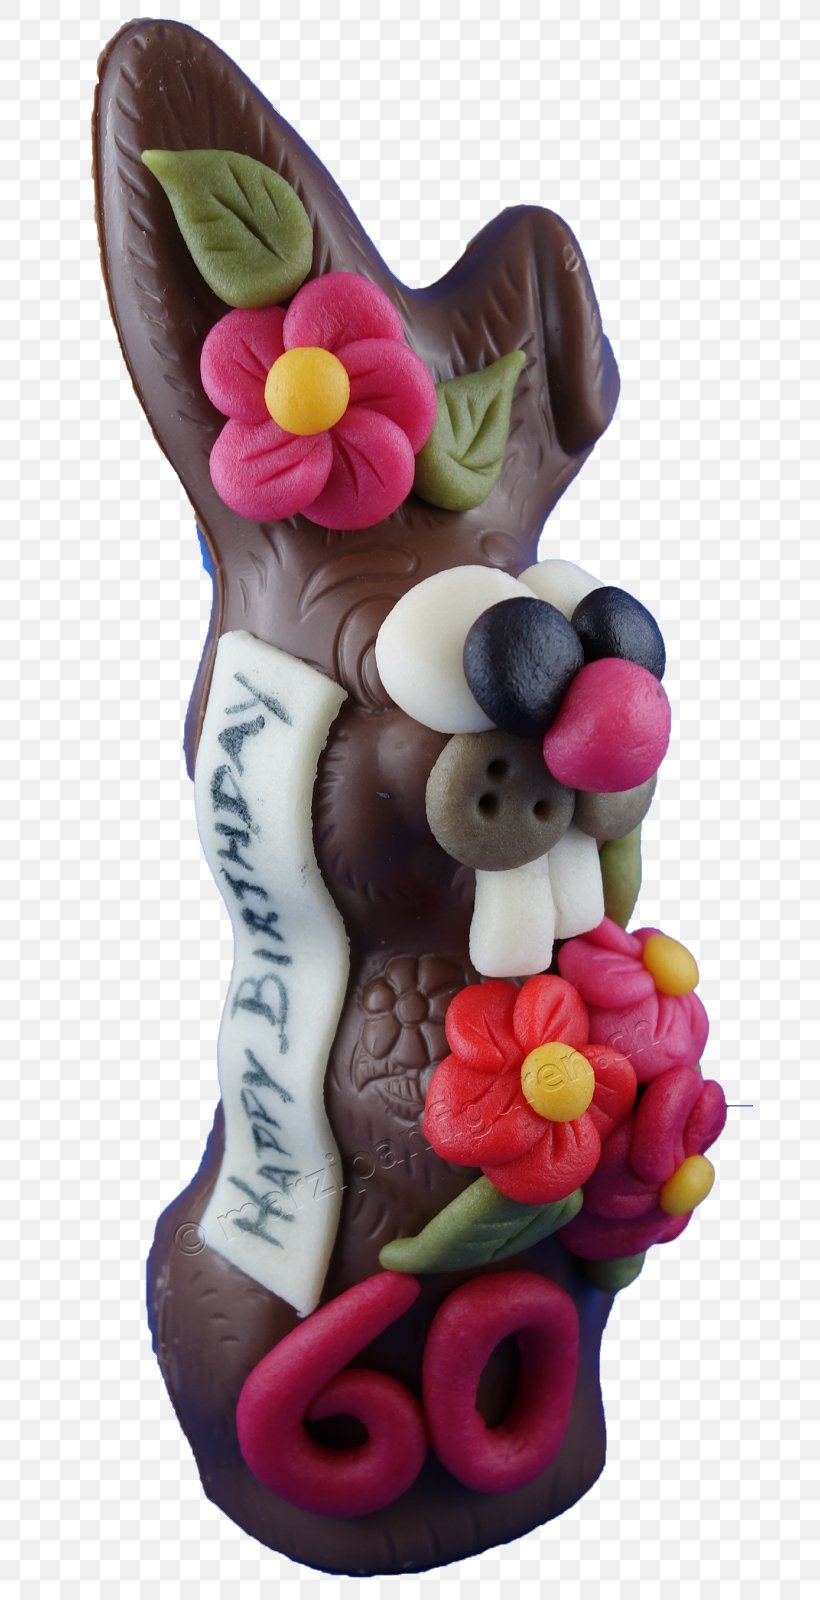 Easter Bunny Leporids March 0 Cake Decorating, PNG, 686x1600px, 2016, Easter Bunny, Cake Decorating, Figurine, Flower Download Free